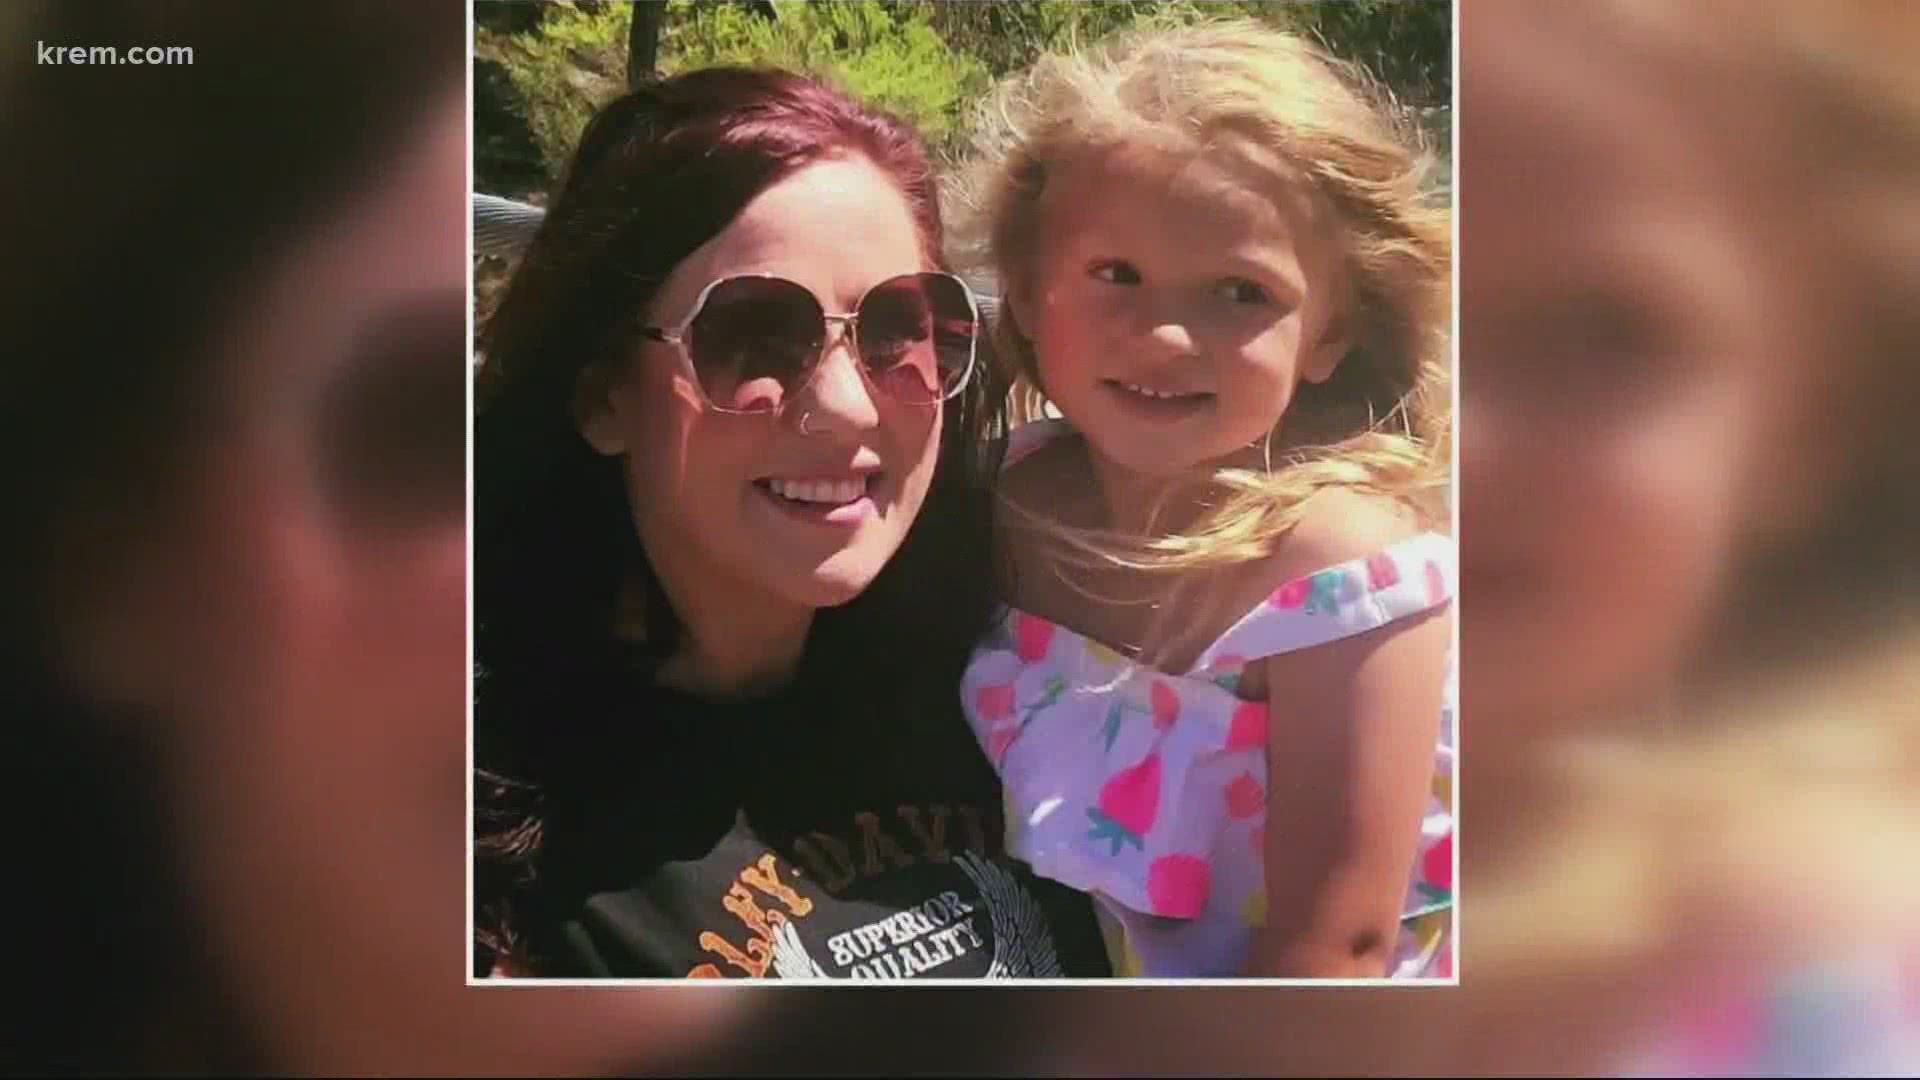 The attack left 5-year-old Lilly fighting for her life in the hospital and her mother, Kassie, dead.